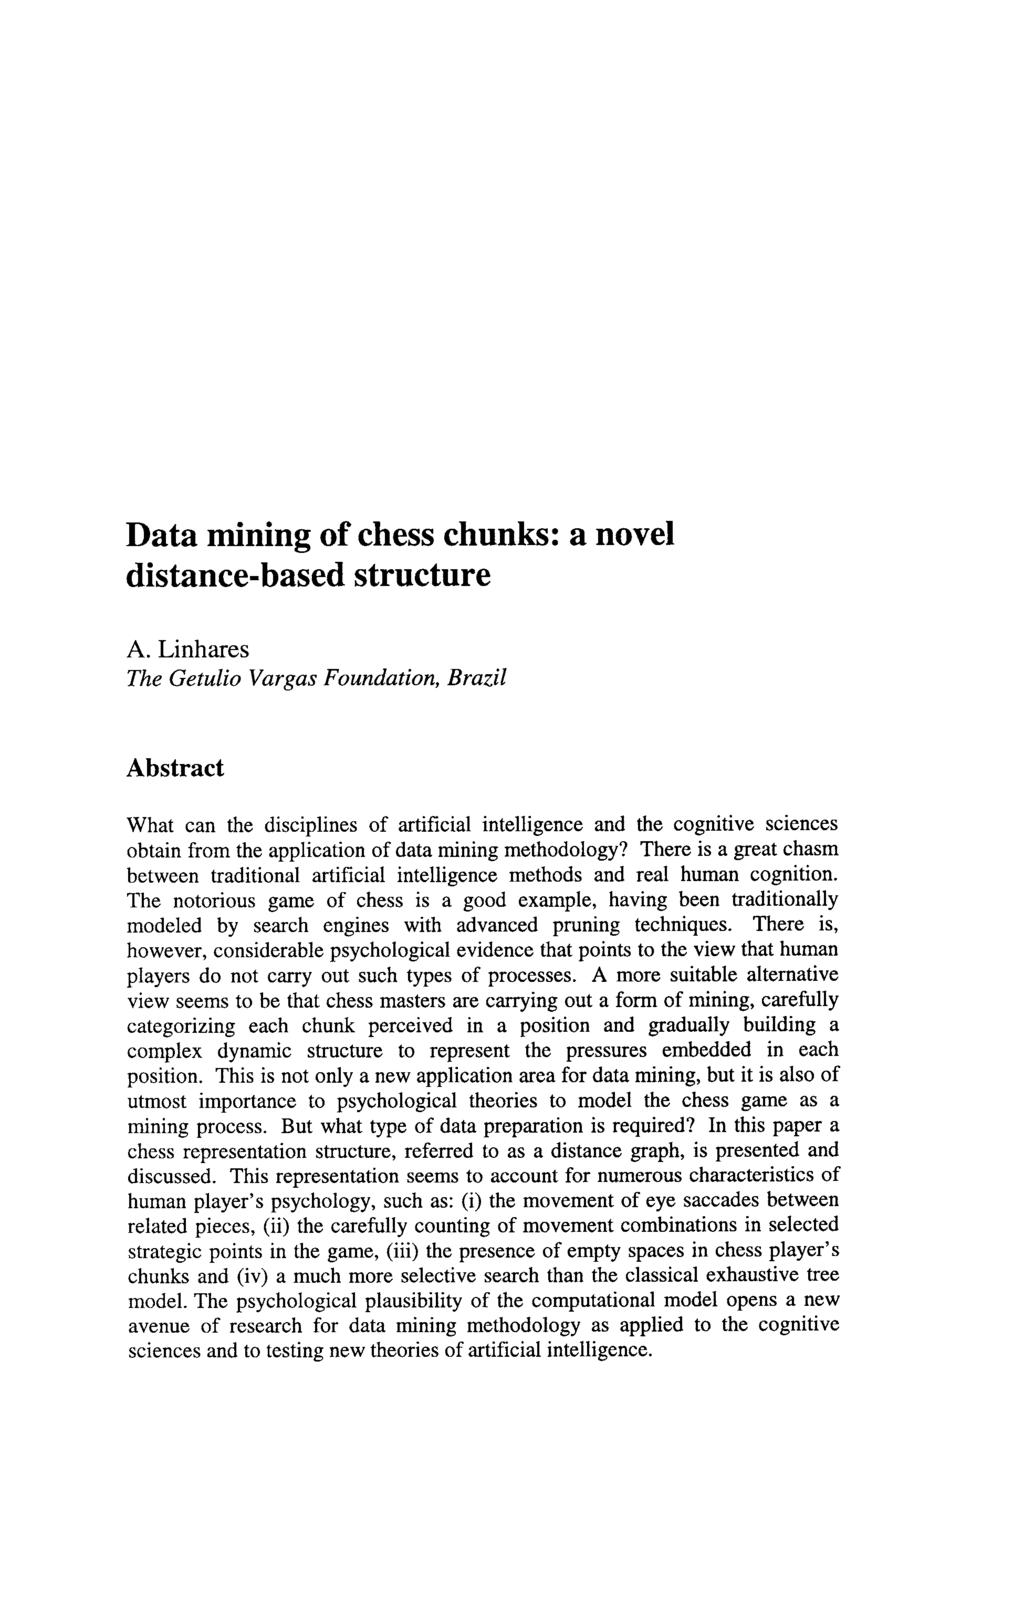 Data mining of chess chunks: a novel distance-based structure A.